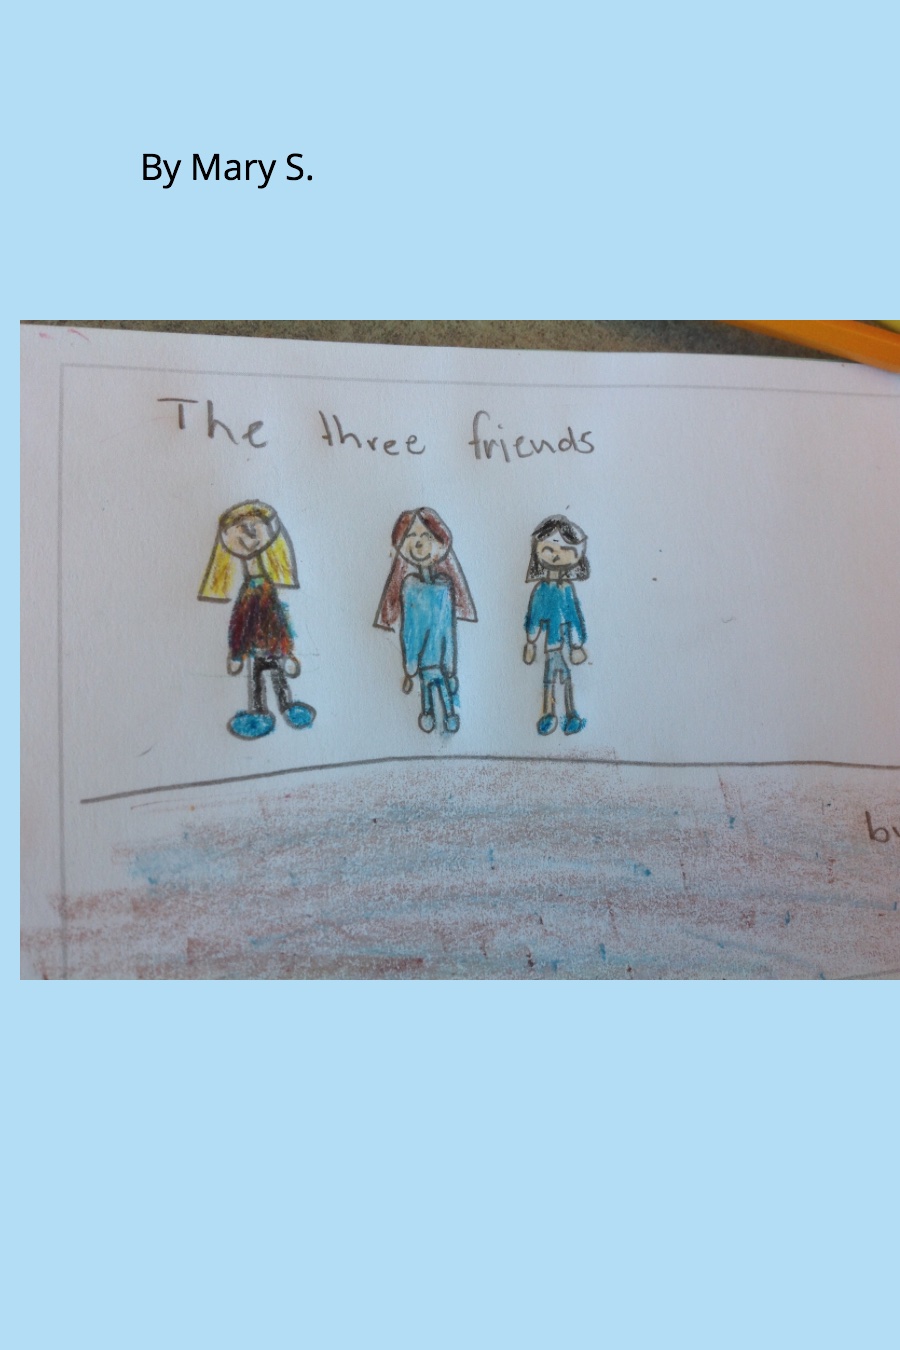 The 3 friends by Mary S